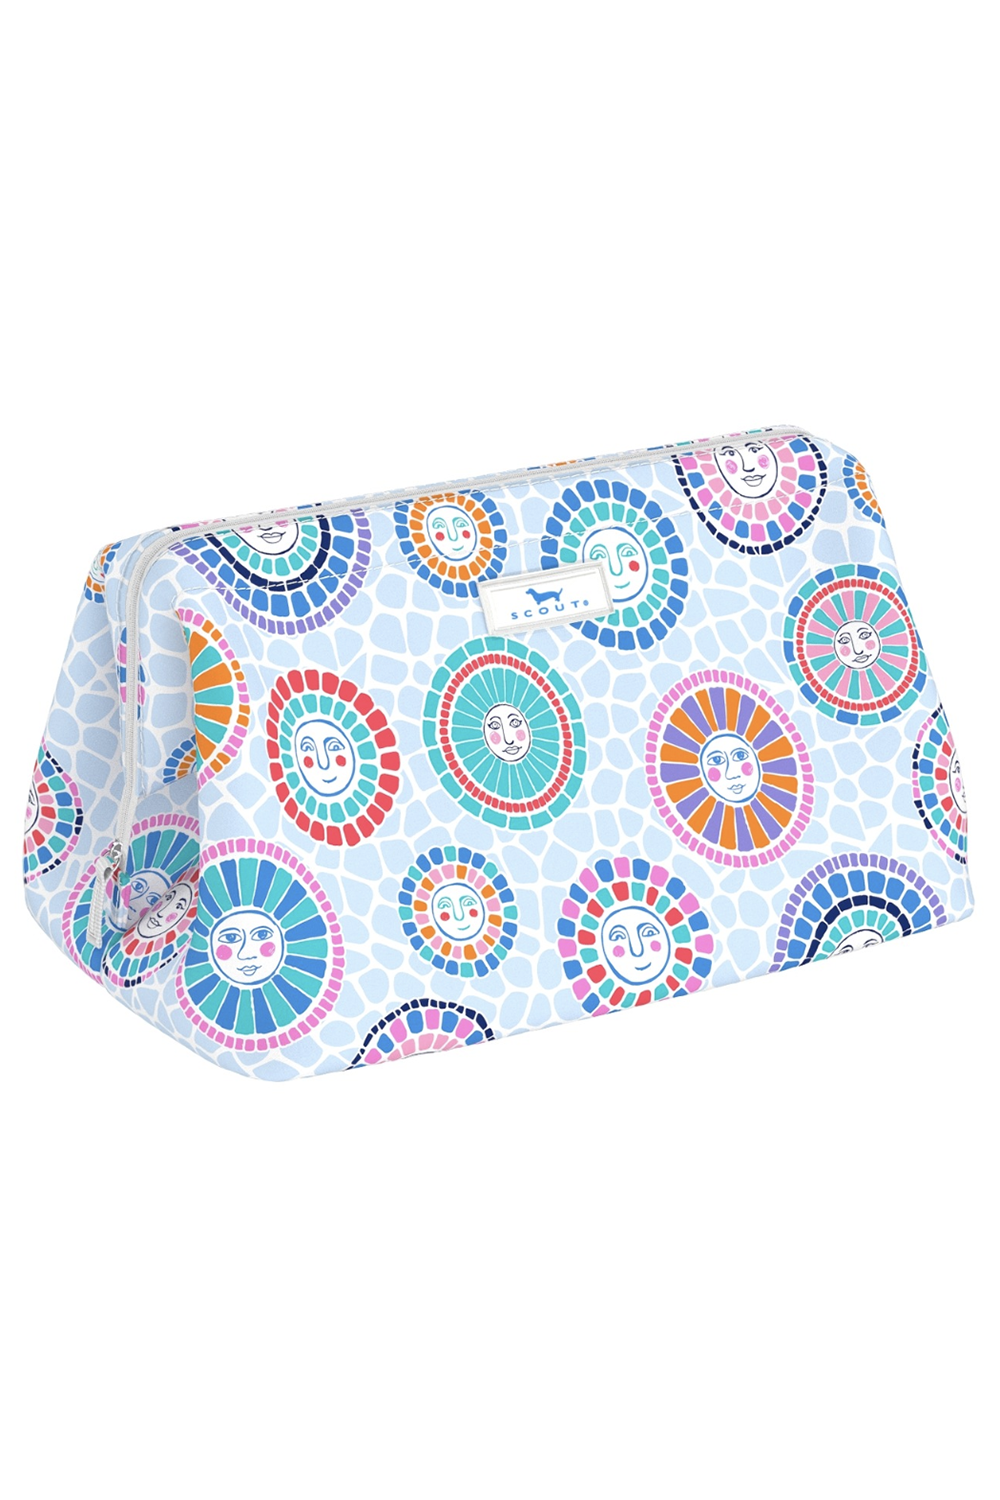 Big Mouth Cosmetic Bag - "Sunny Side Up" SUM24